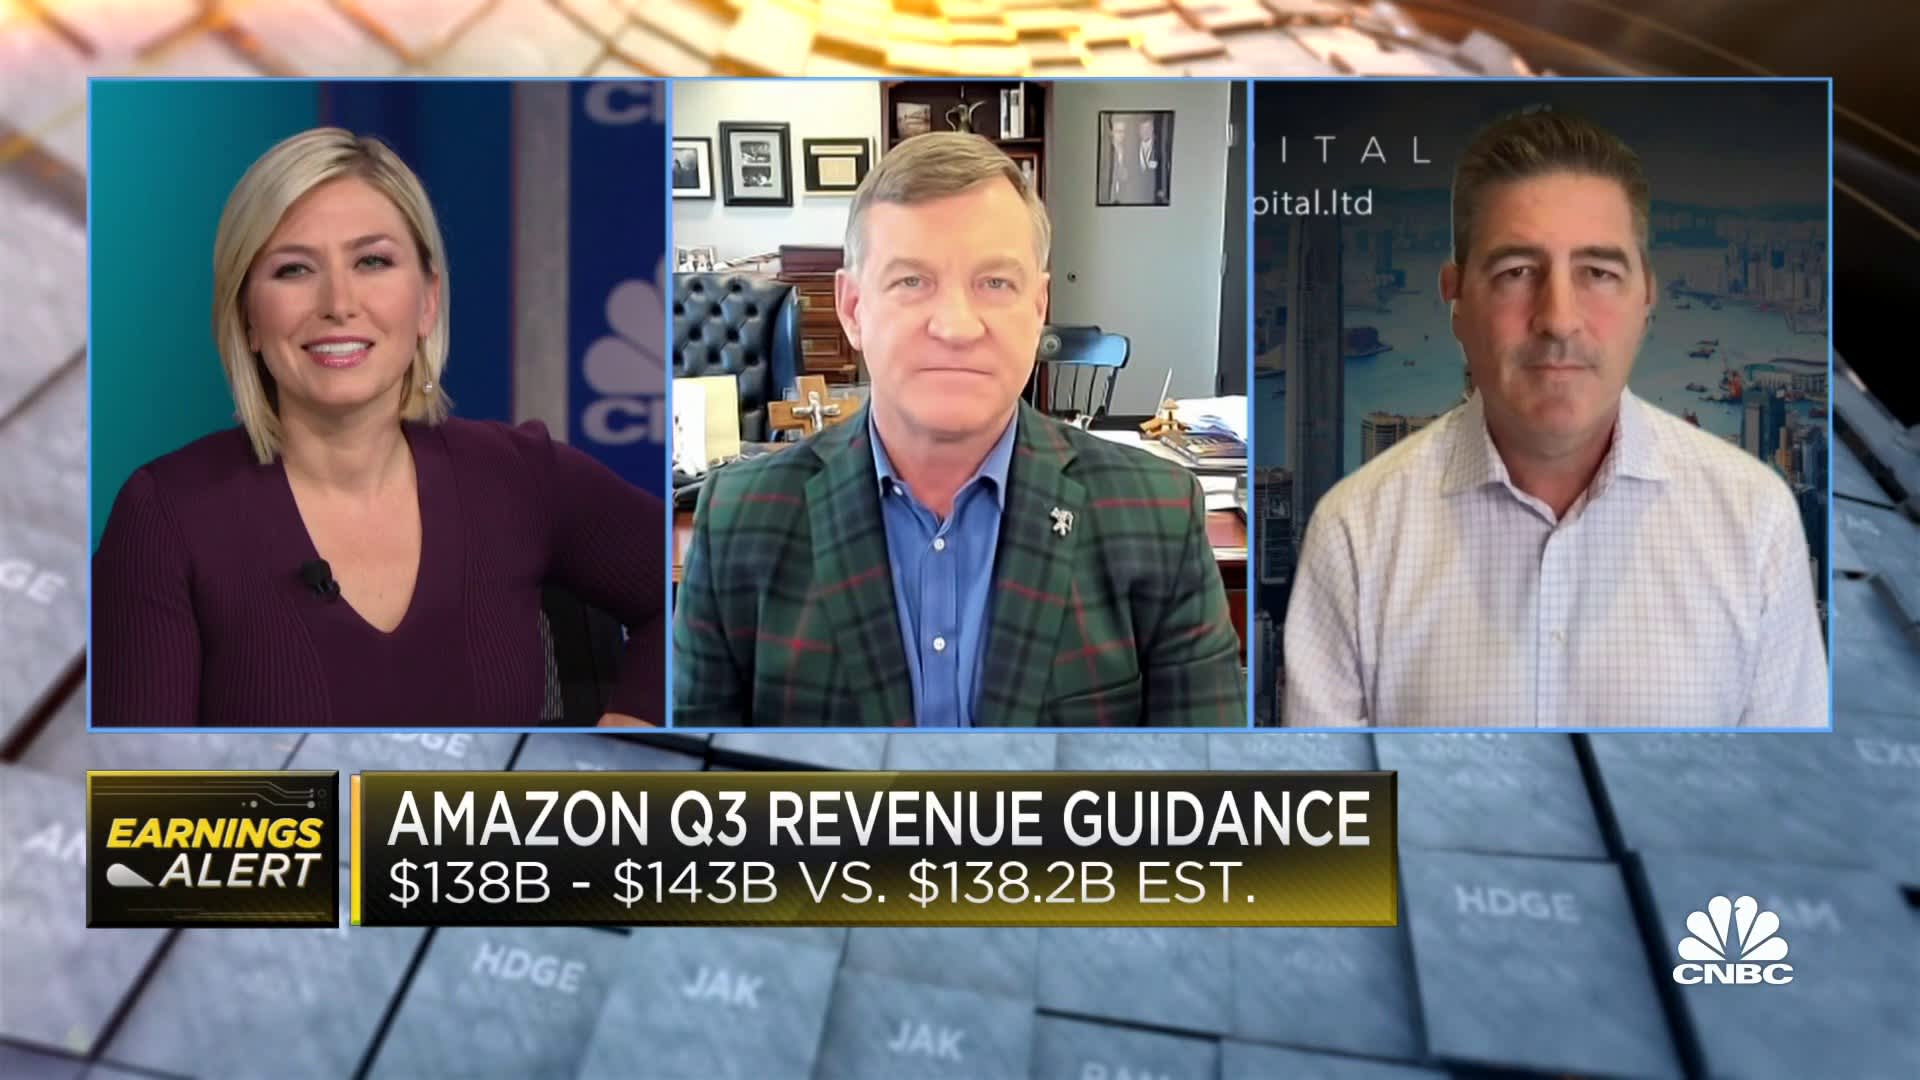 Amazon reports sales growth of 11% and issues optimistic guidance